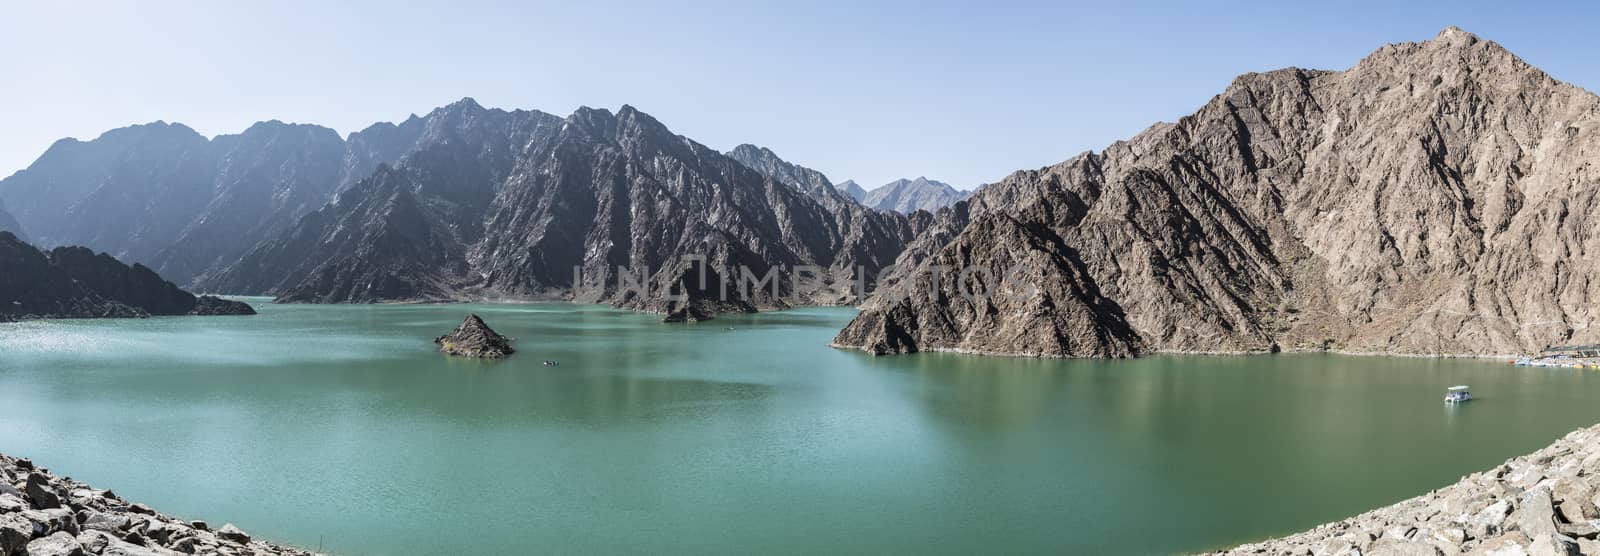 Panoramic view of Hatta Dam  where people can enjoy kayaking and boating on the lake. United Arab Emirates